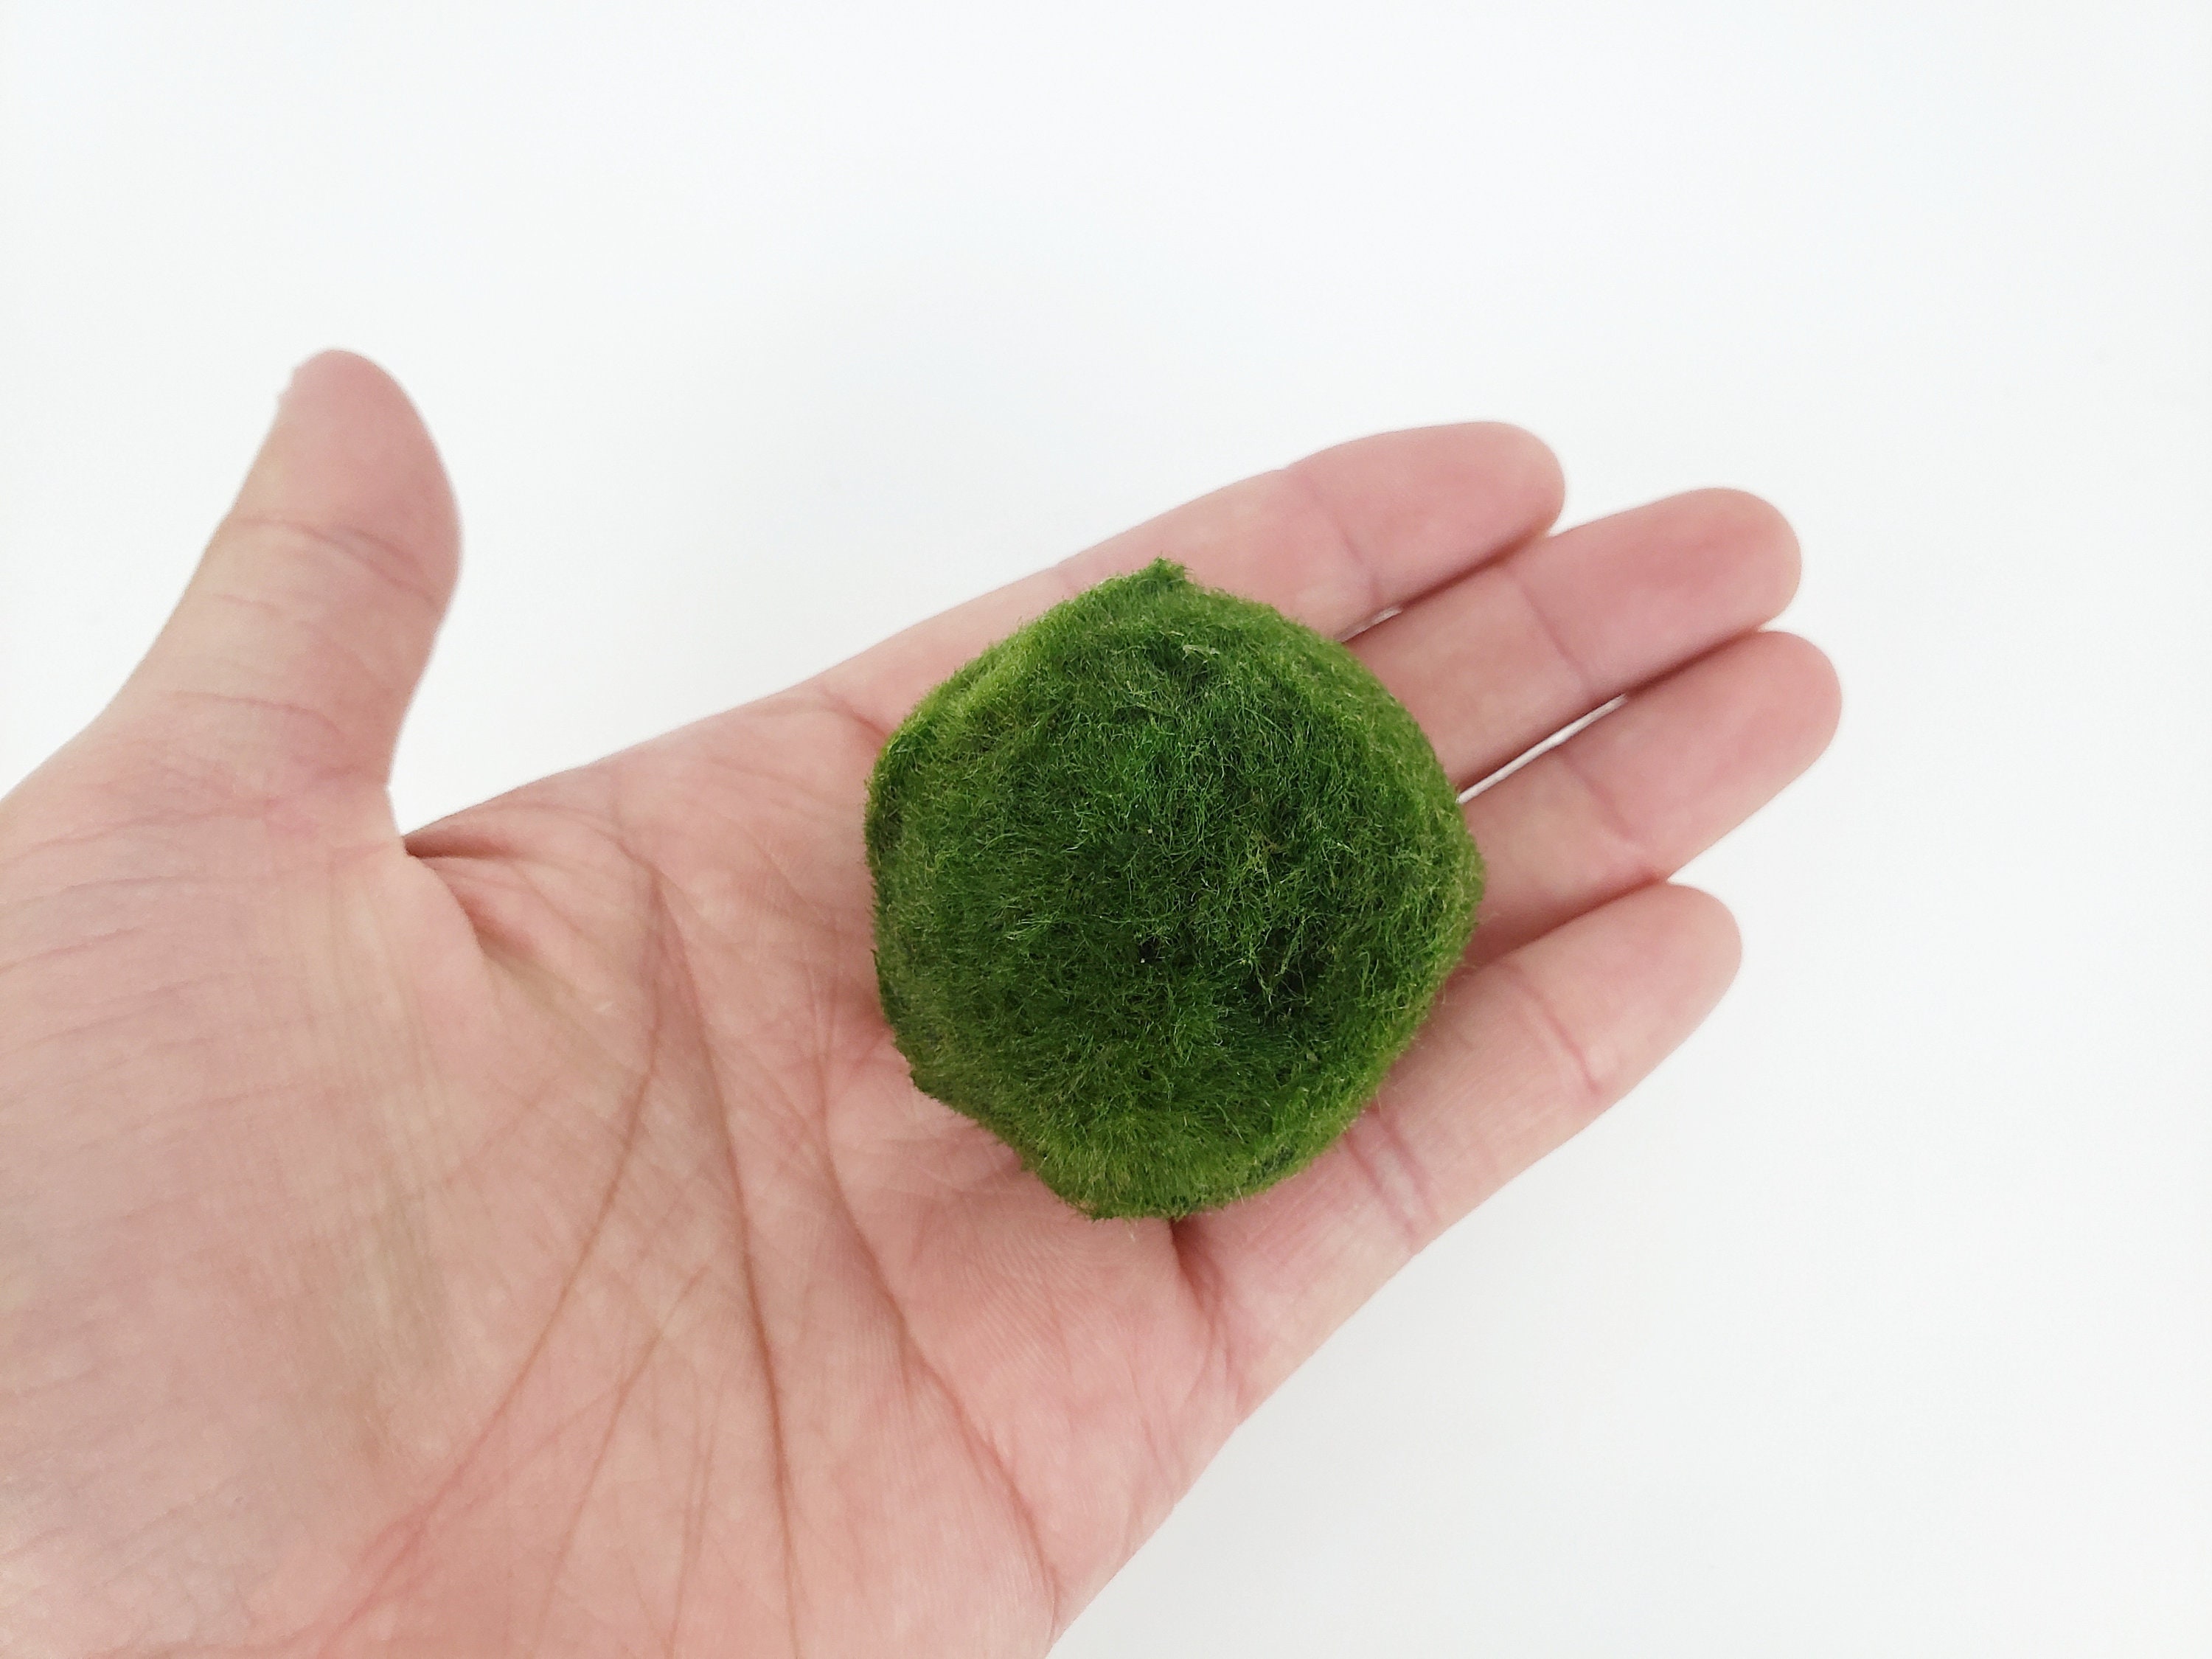 Buy 1 GIANT Get 1 LARGE Ball FREE Marimo Moss Ball For Etsy